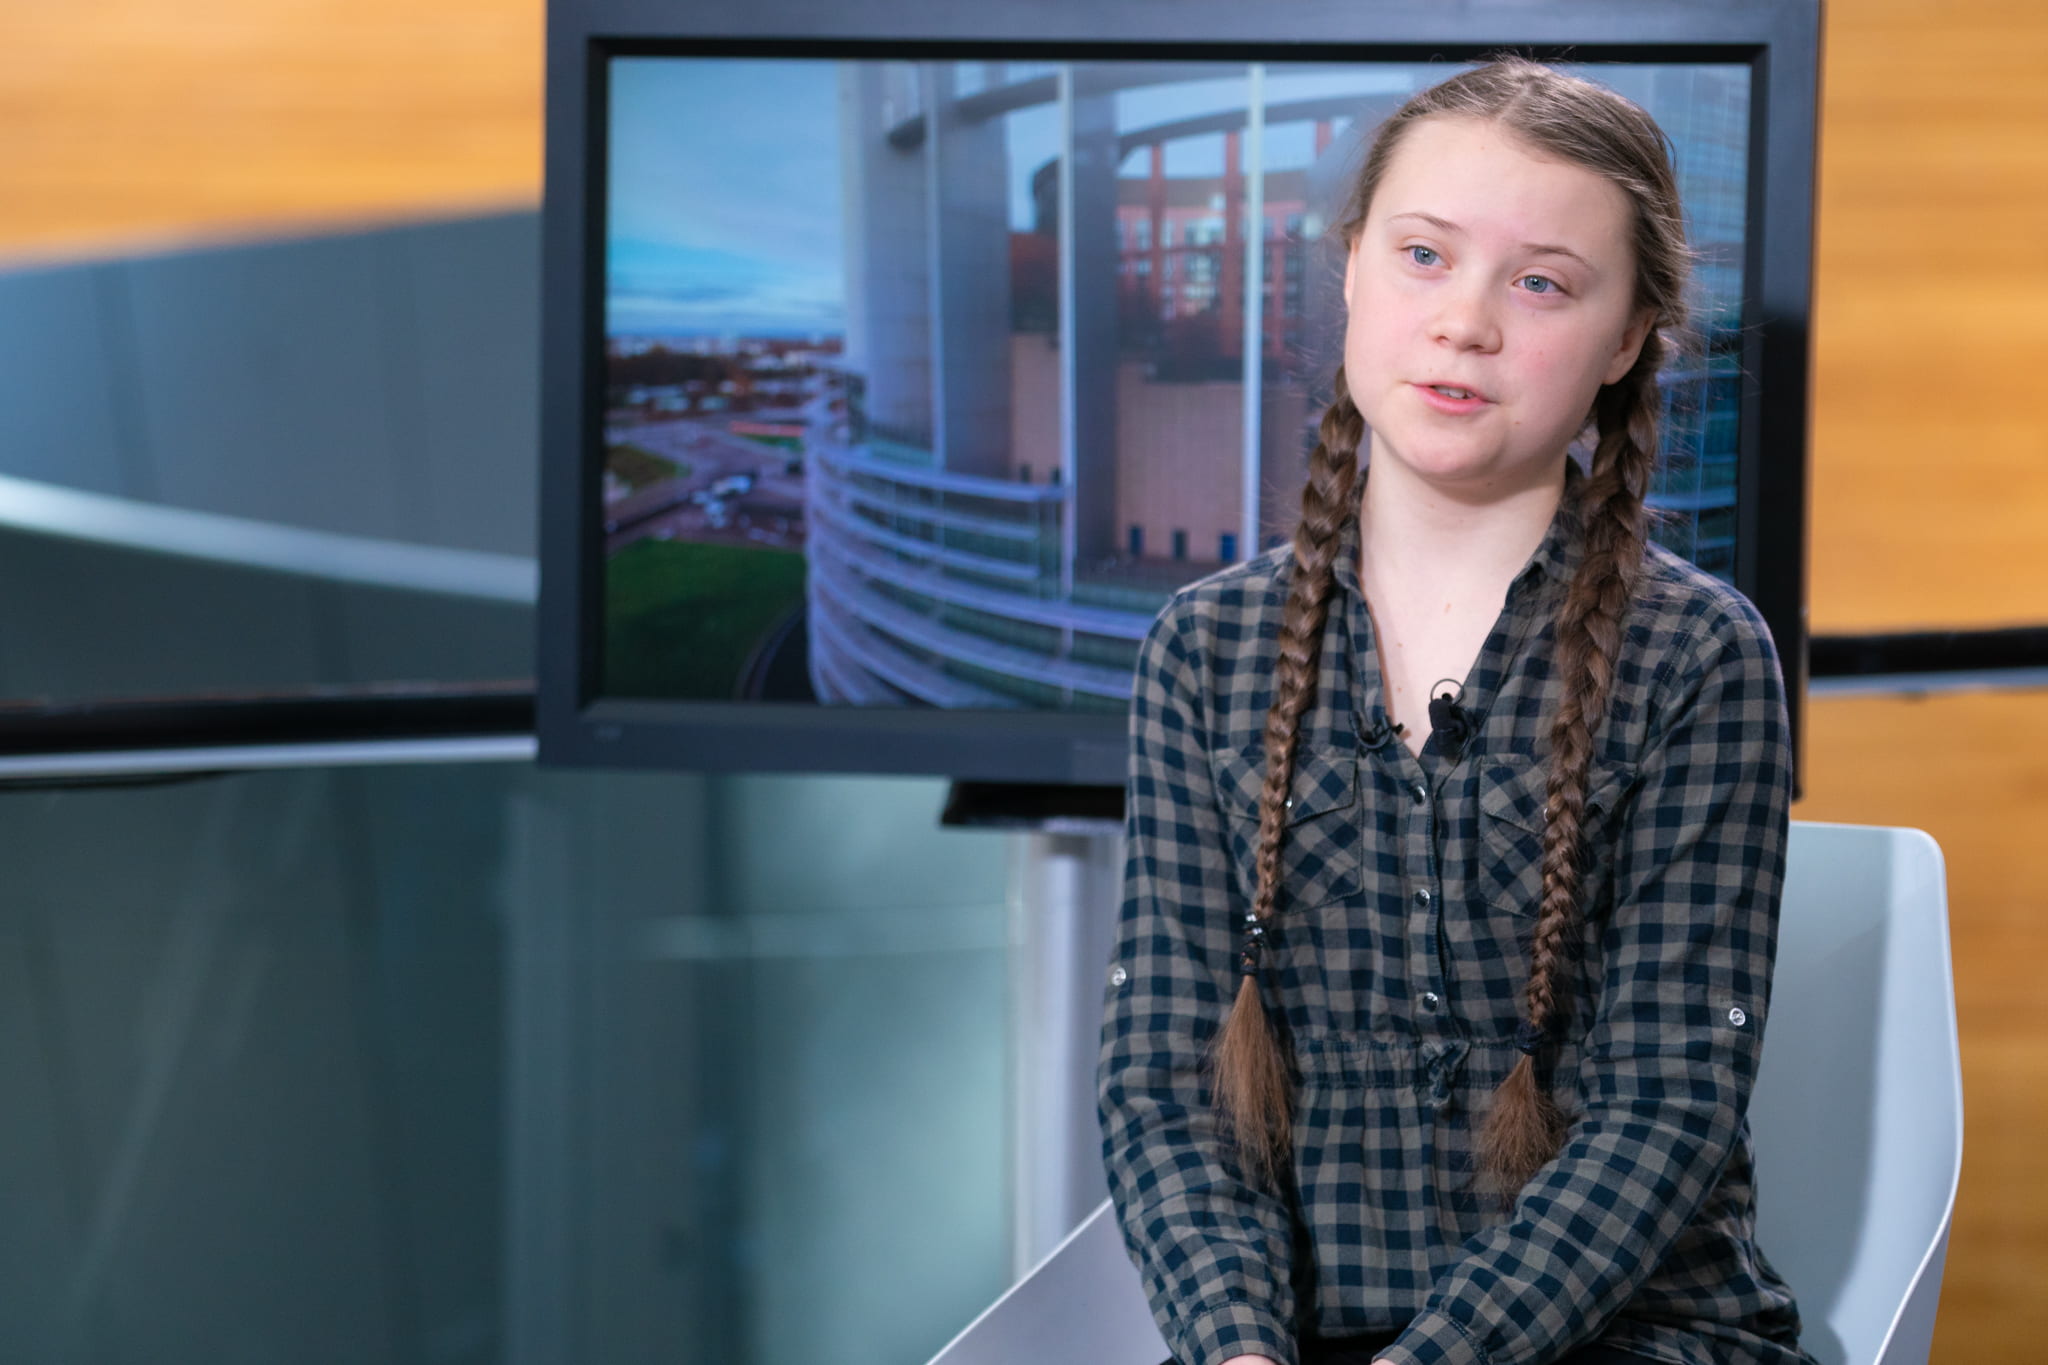 Greta Thunberg sitting in a chair and being interviewed.